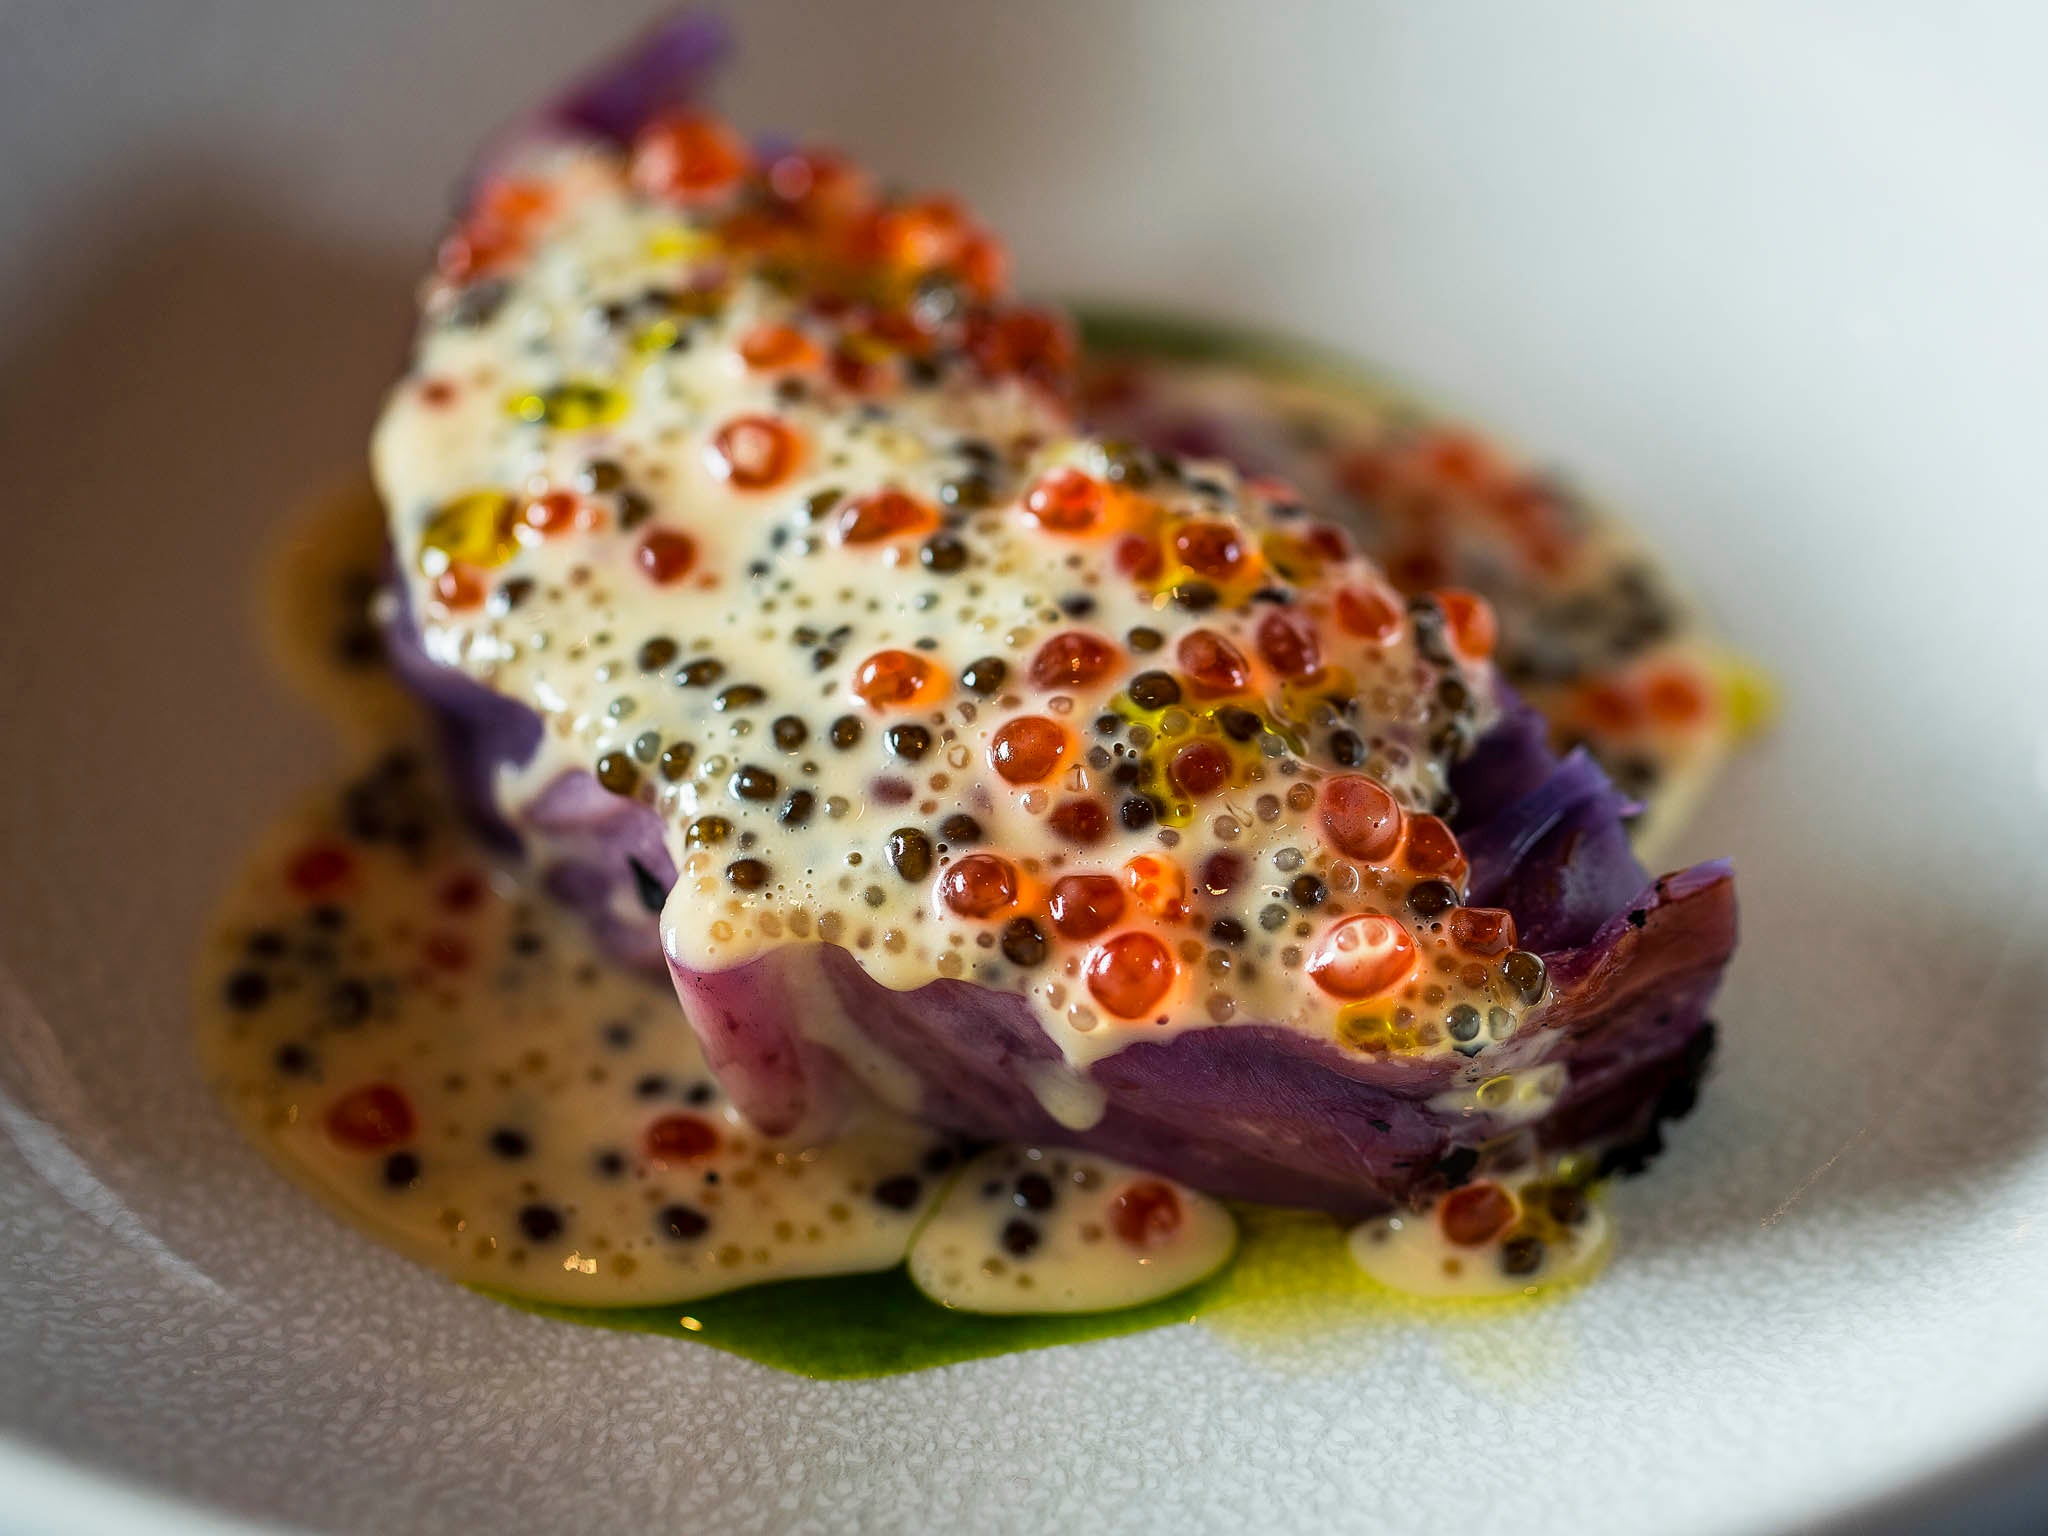 Also on the menu at White Rabbit: a range of caviars served in baked cabbage cups